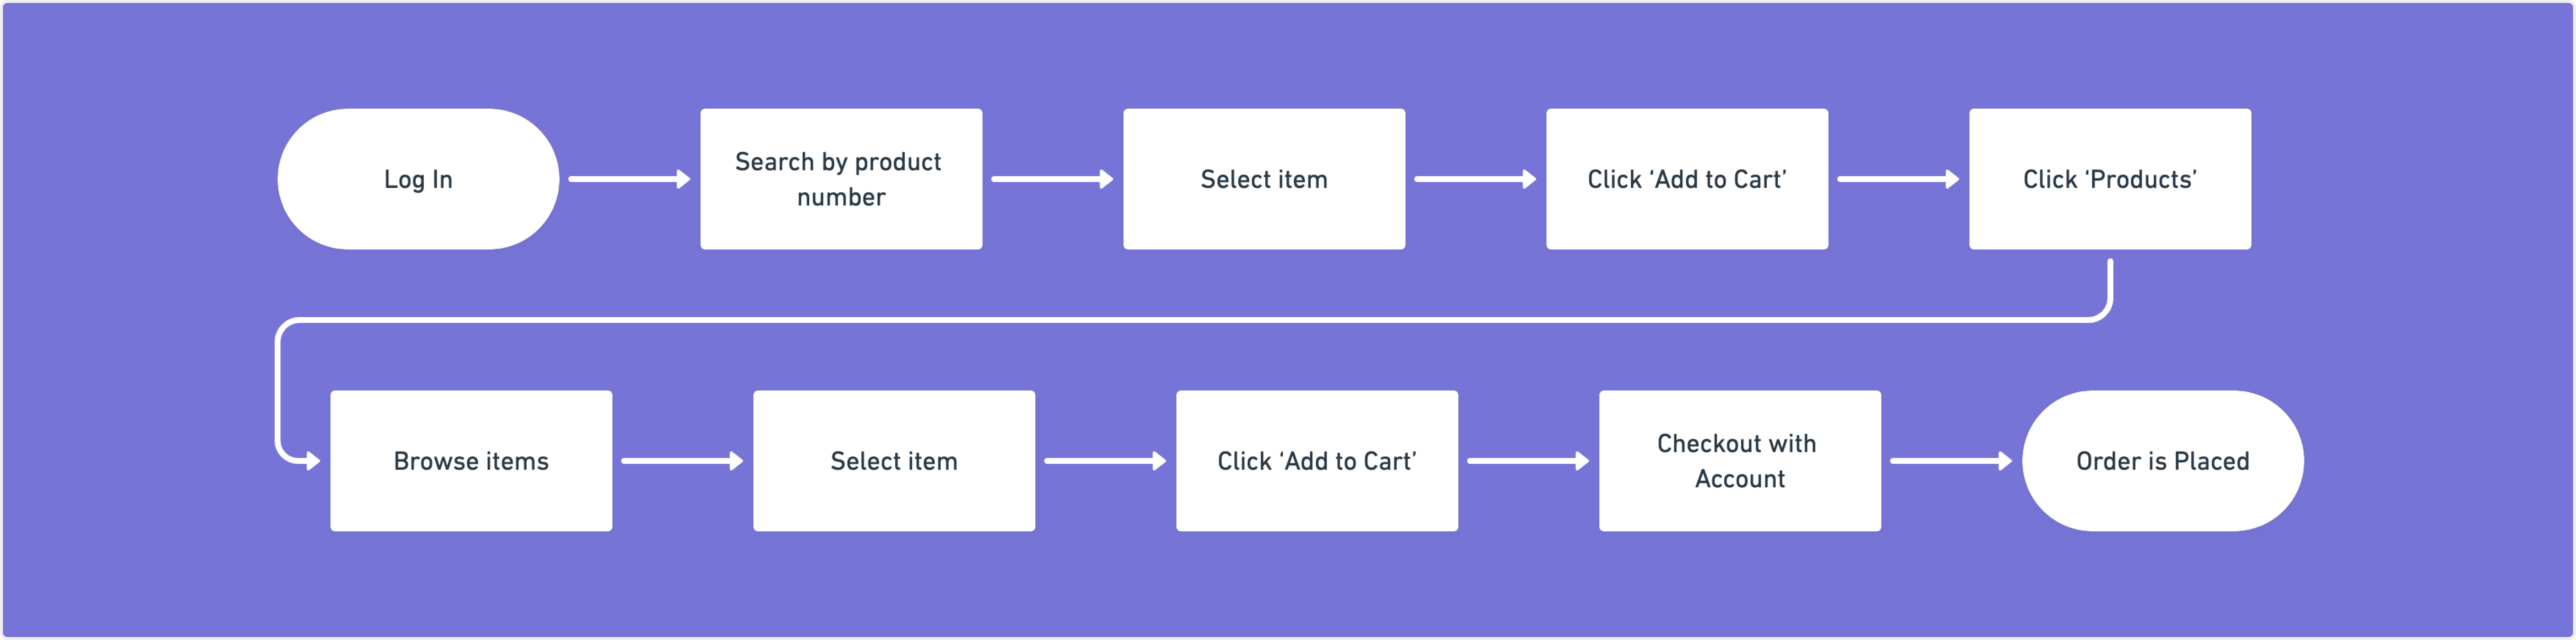 User Journey for buying from Uline